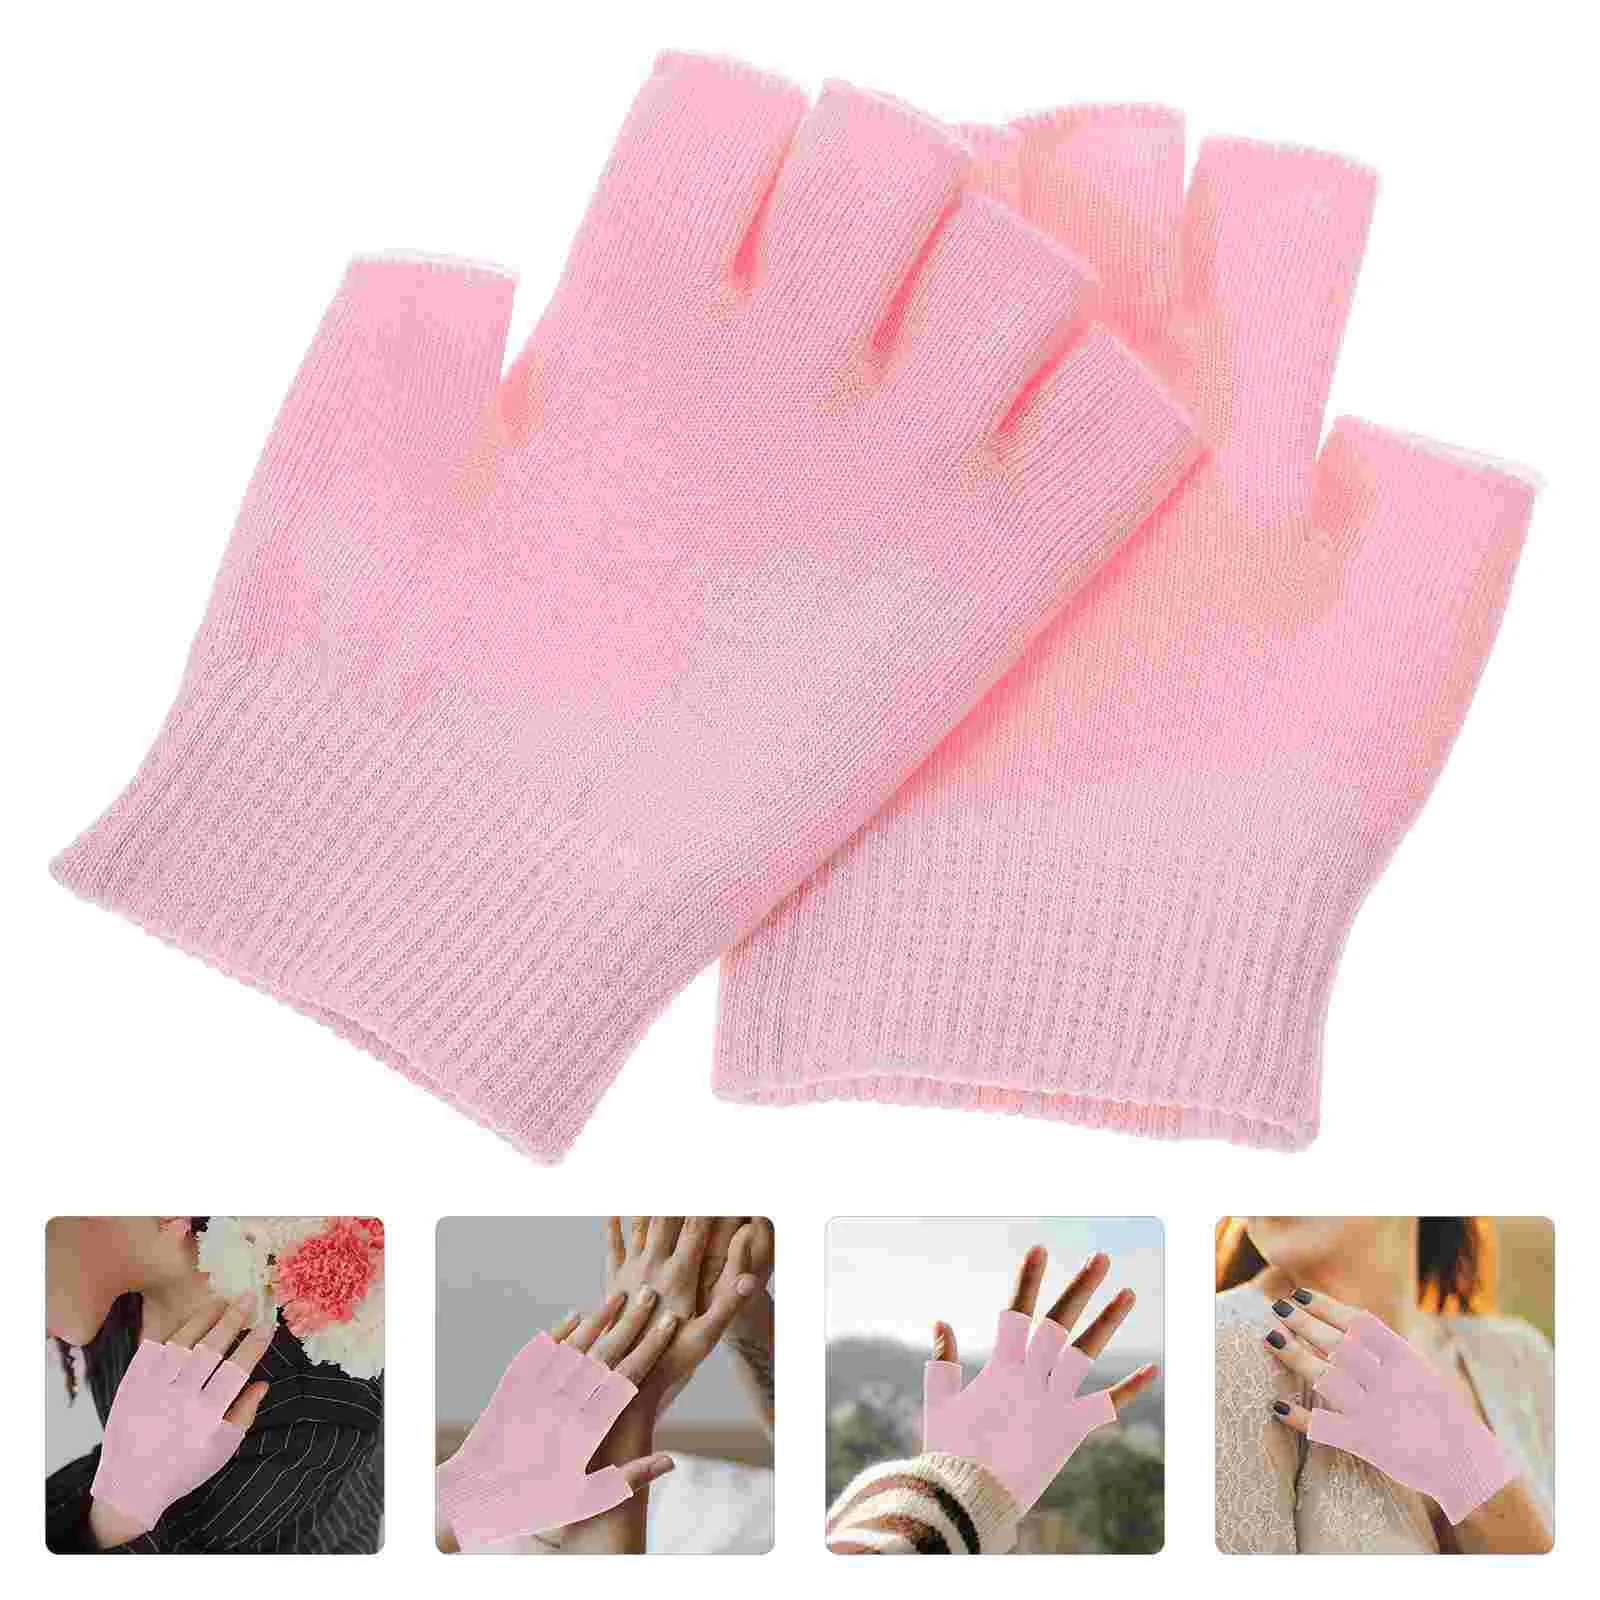 

Gloves Moisturizing Hand Mitten Spa Rough Cracked Skin Dry Inner Vitamins Oils Essential Infused Lining Calluses Moisturing